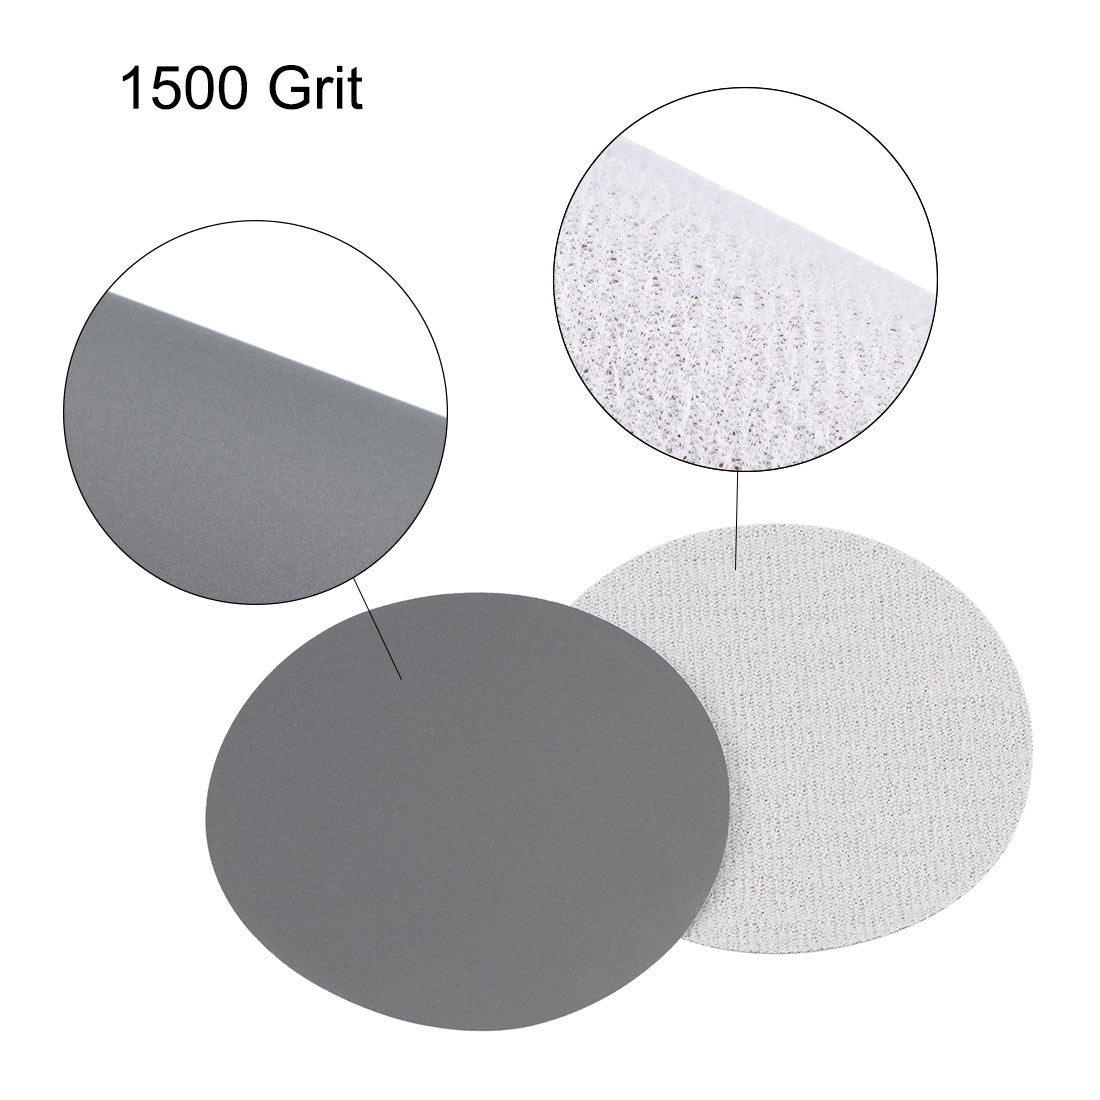 Uxcell Uxcell 3 inch Wet Dry Disc 1500 Grit Hook and Loop Sanding Disc Silicon Carbide 20pcs